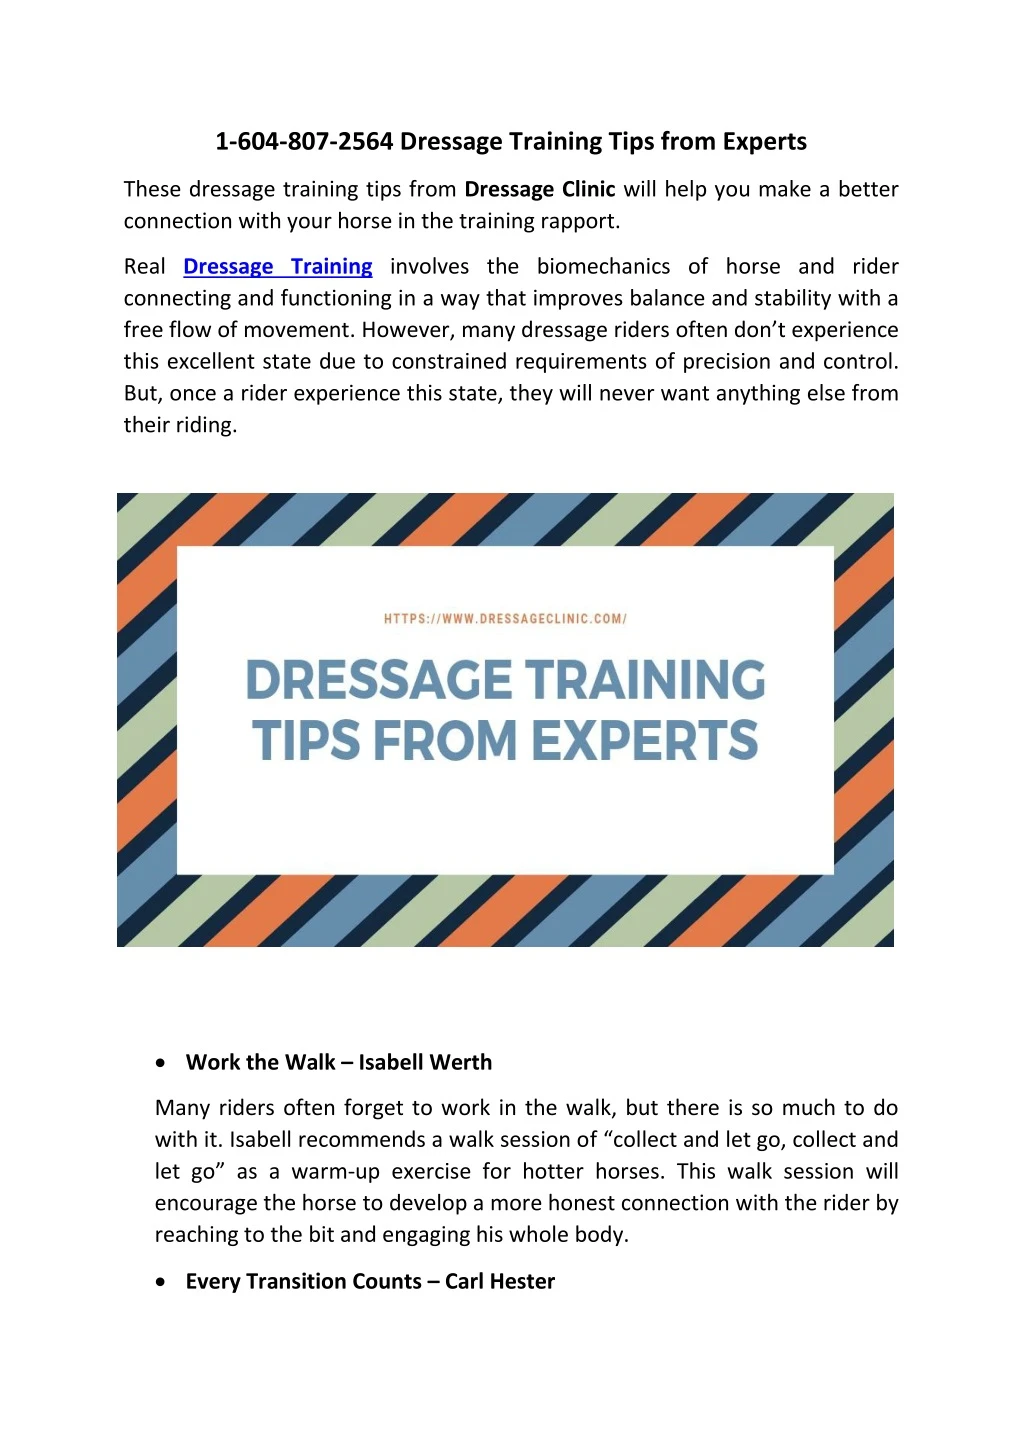 1 604 807 2564 dressage training tips from experts